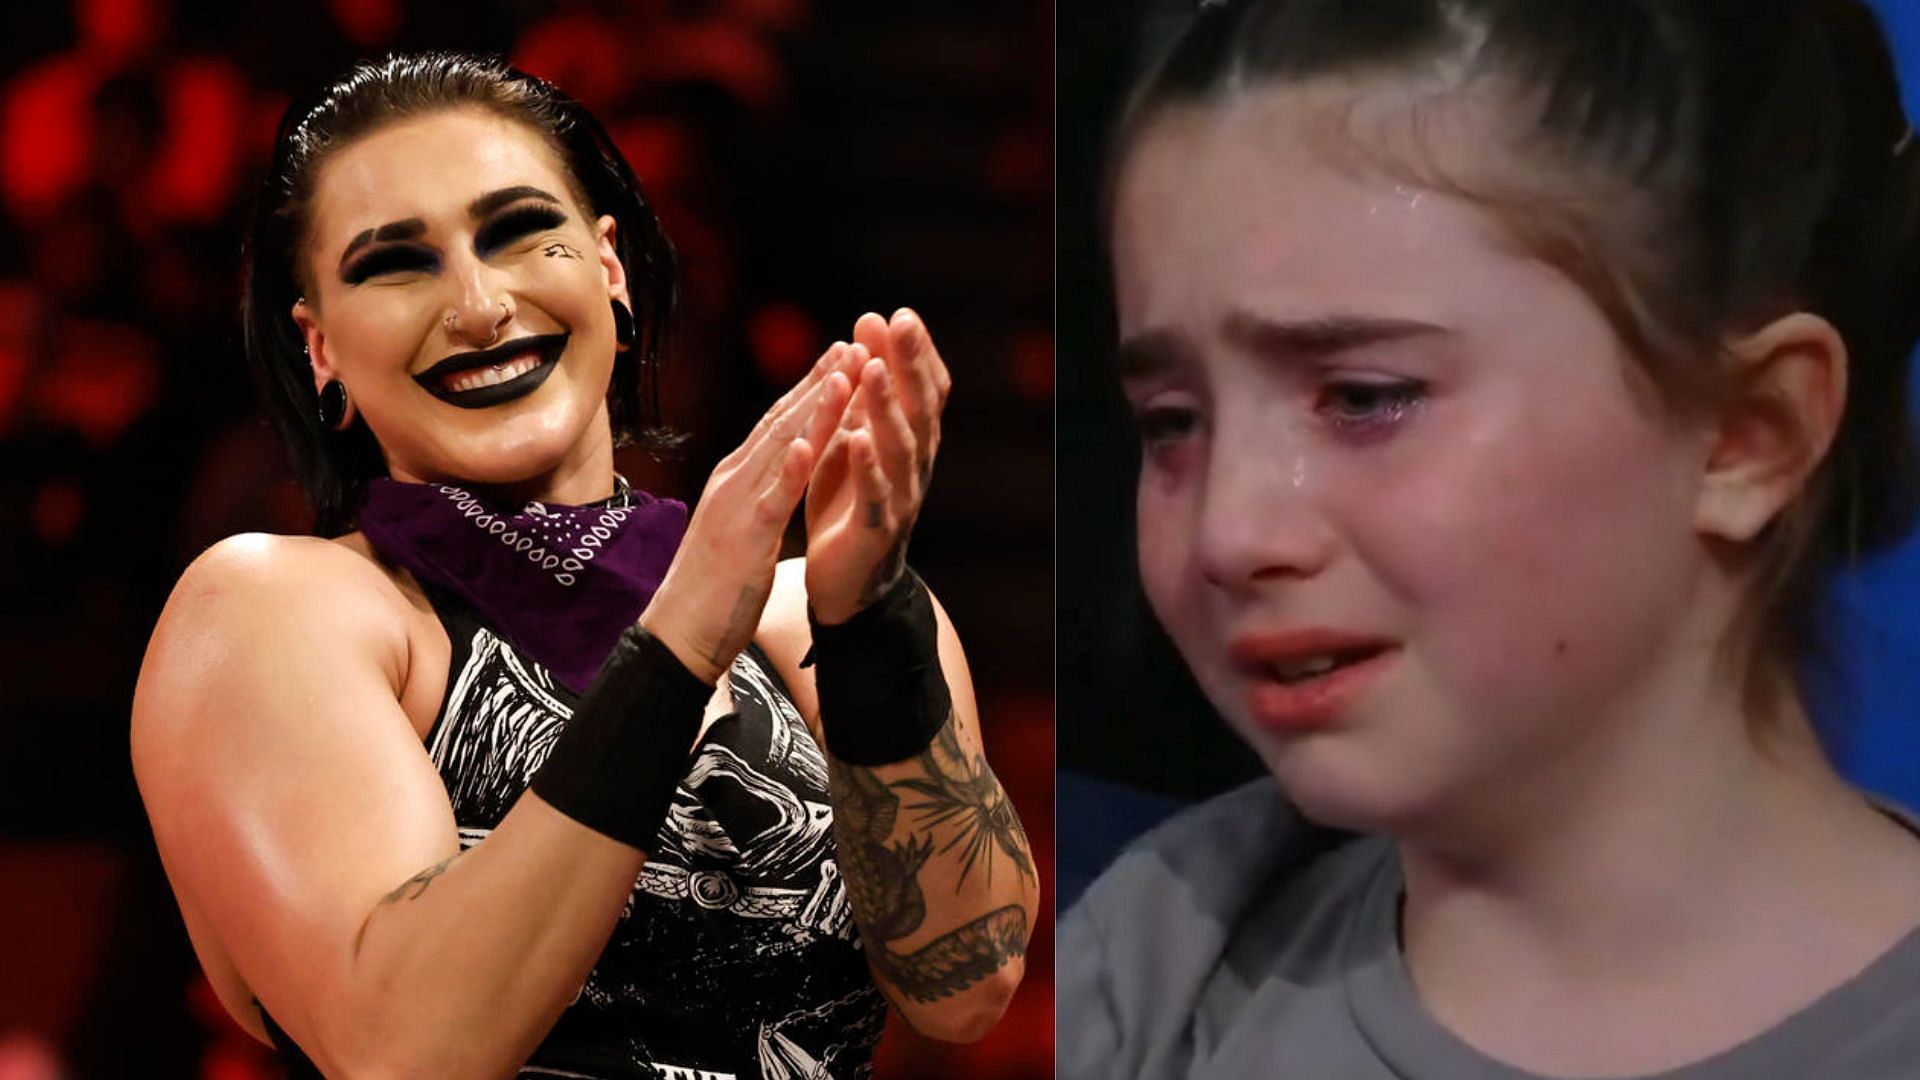 A young fan got every upset this past Friday on WWE SmackDown.